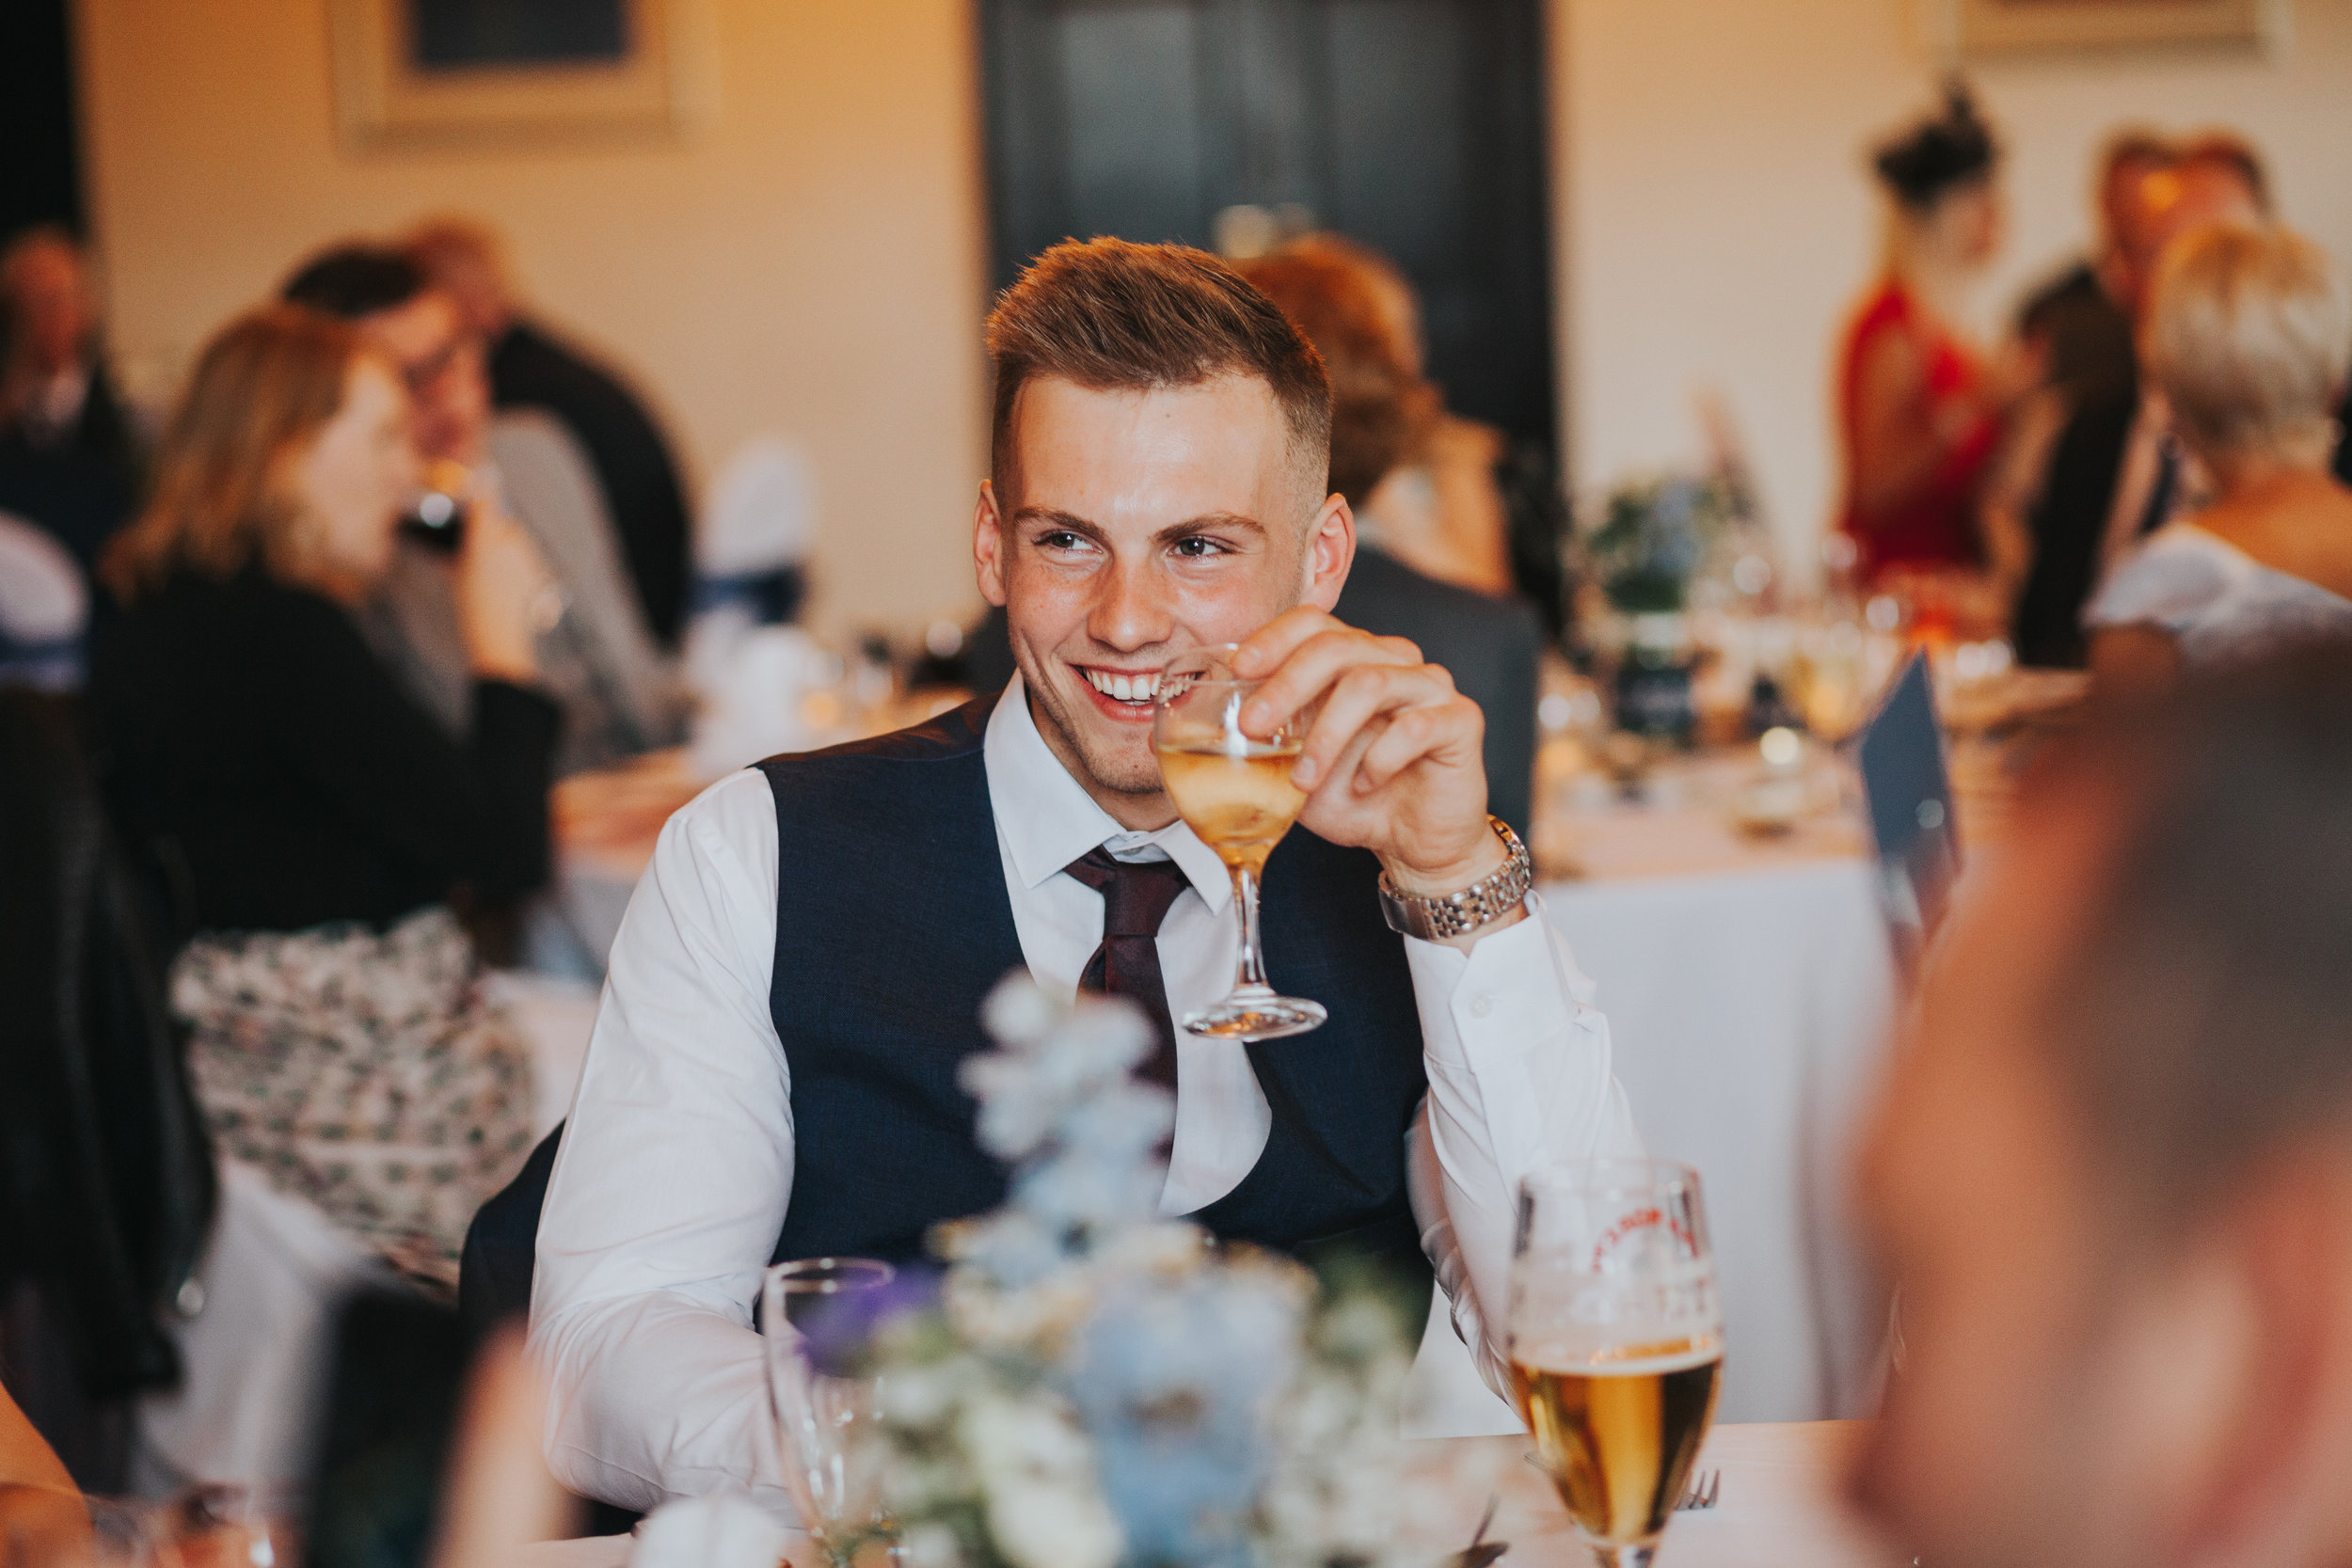 Male wedding guest enjoys some champagne while smiling. 